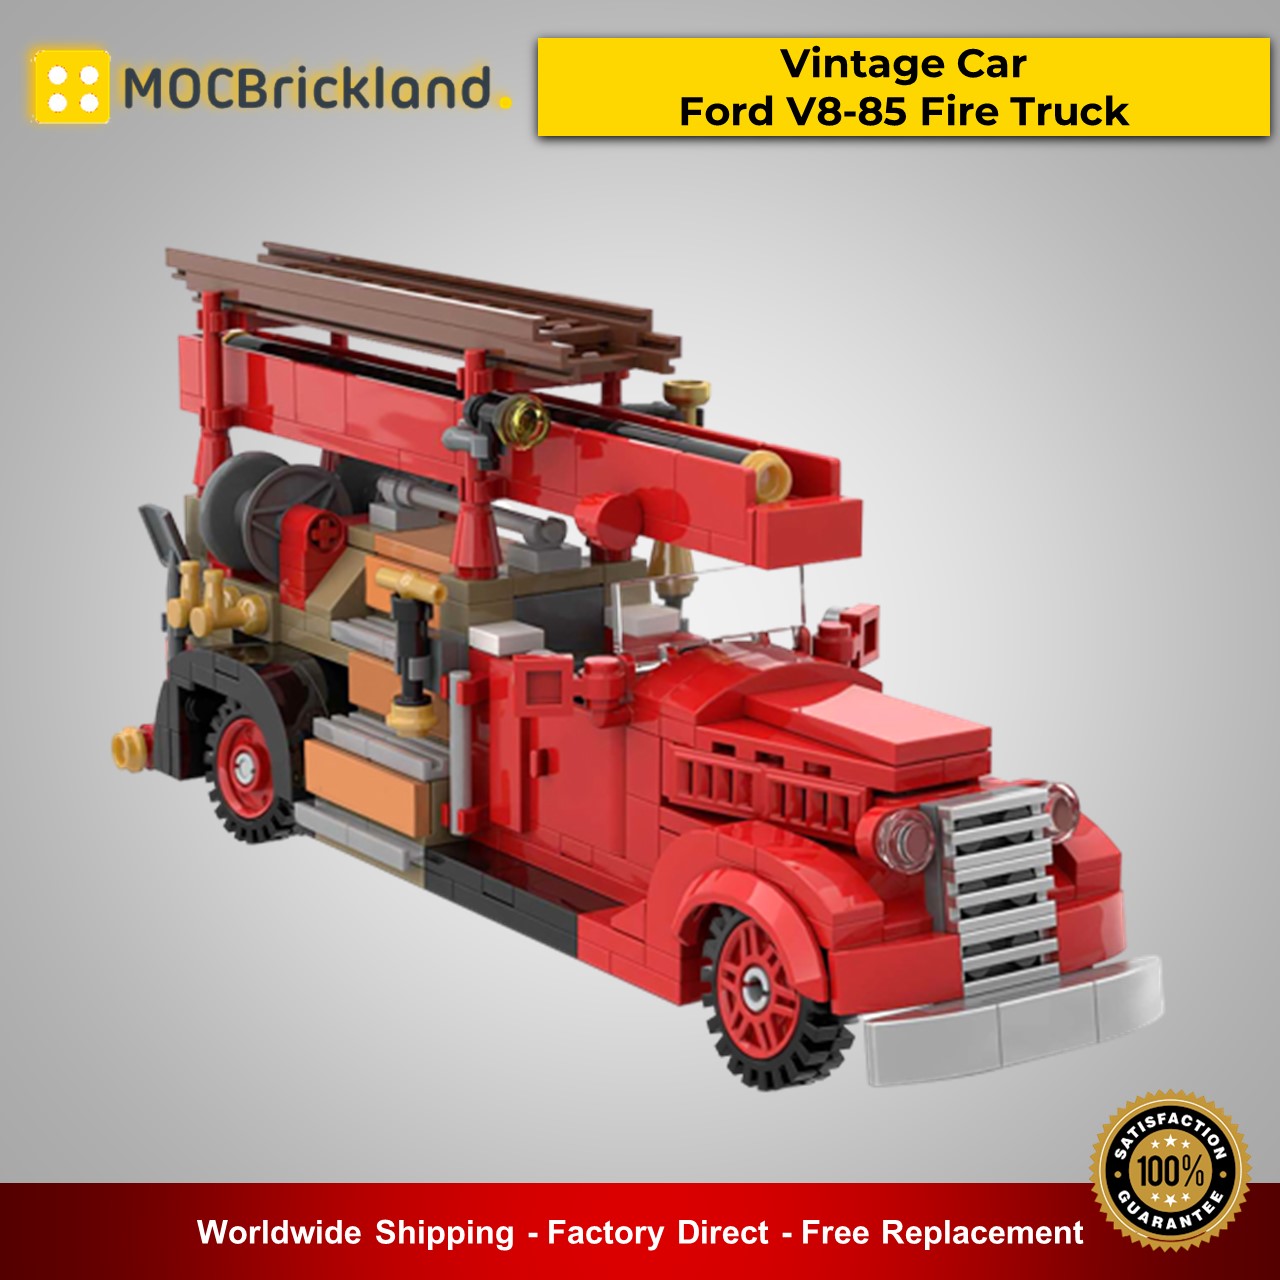 MOC-35195 Vintage Car – Ford V8-85 Fire Truck Technic Designed By SugarBricks With 404 Pieces